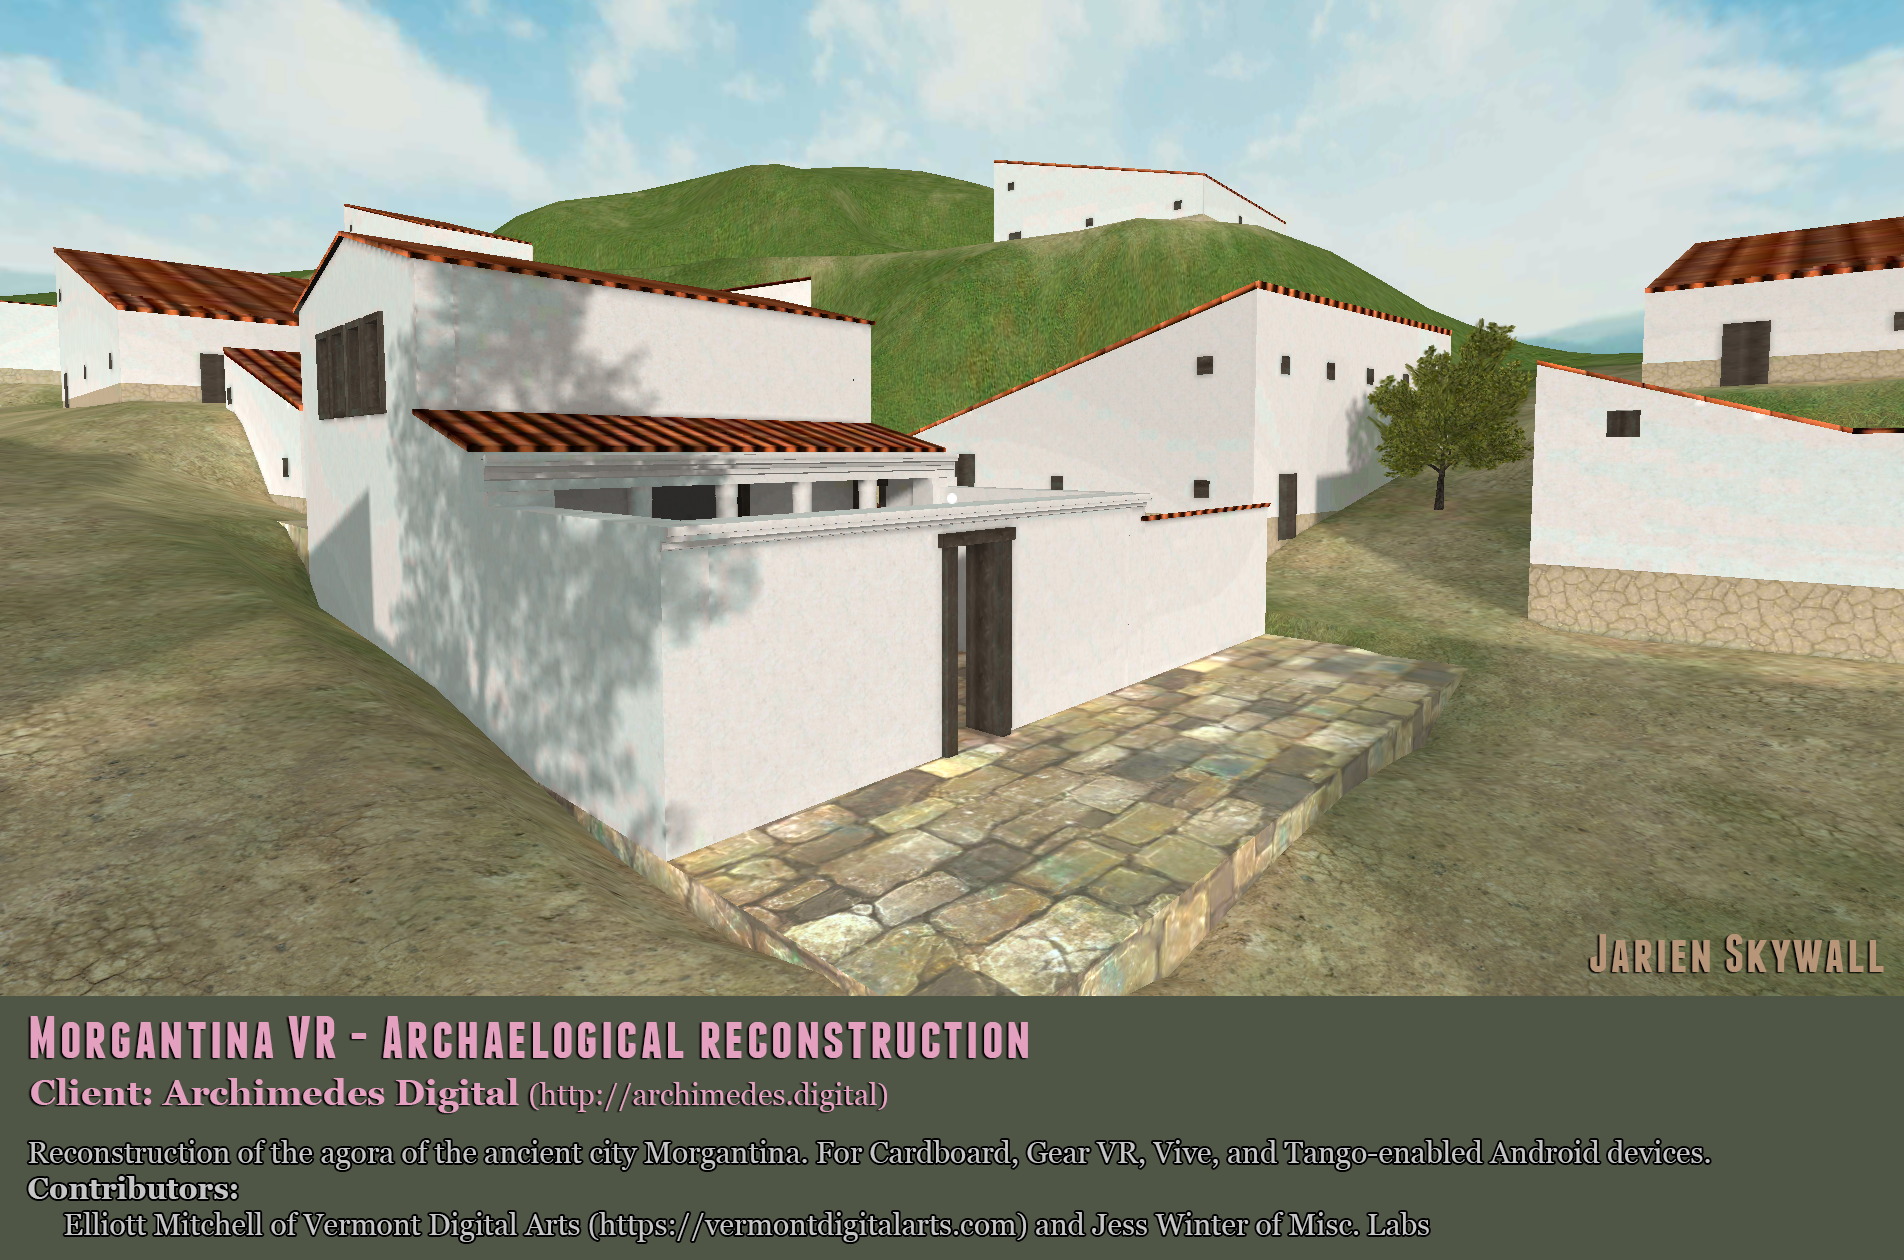 Morgantina VR archaelogical reconstruction by Jarien Skywall for Archimedes Digital